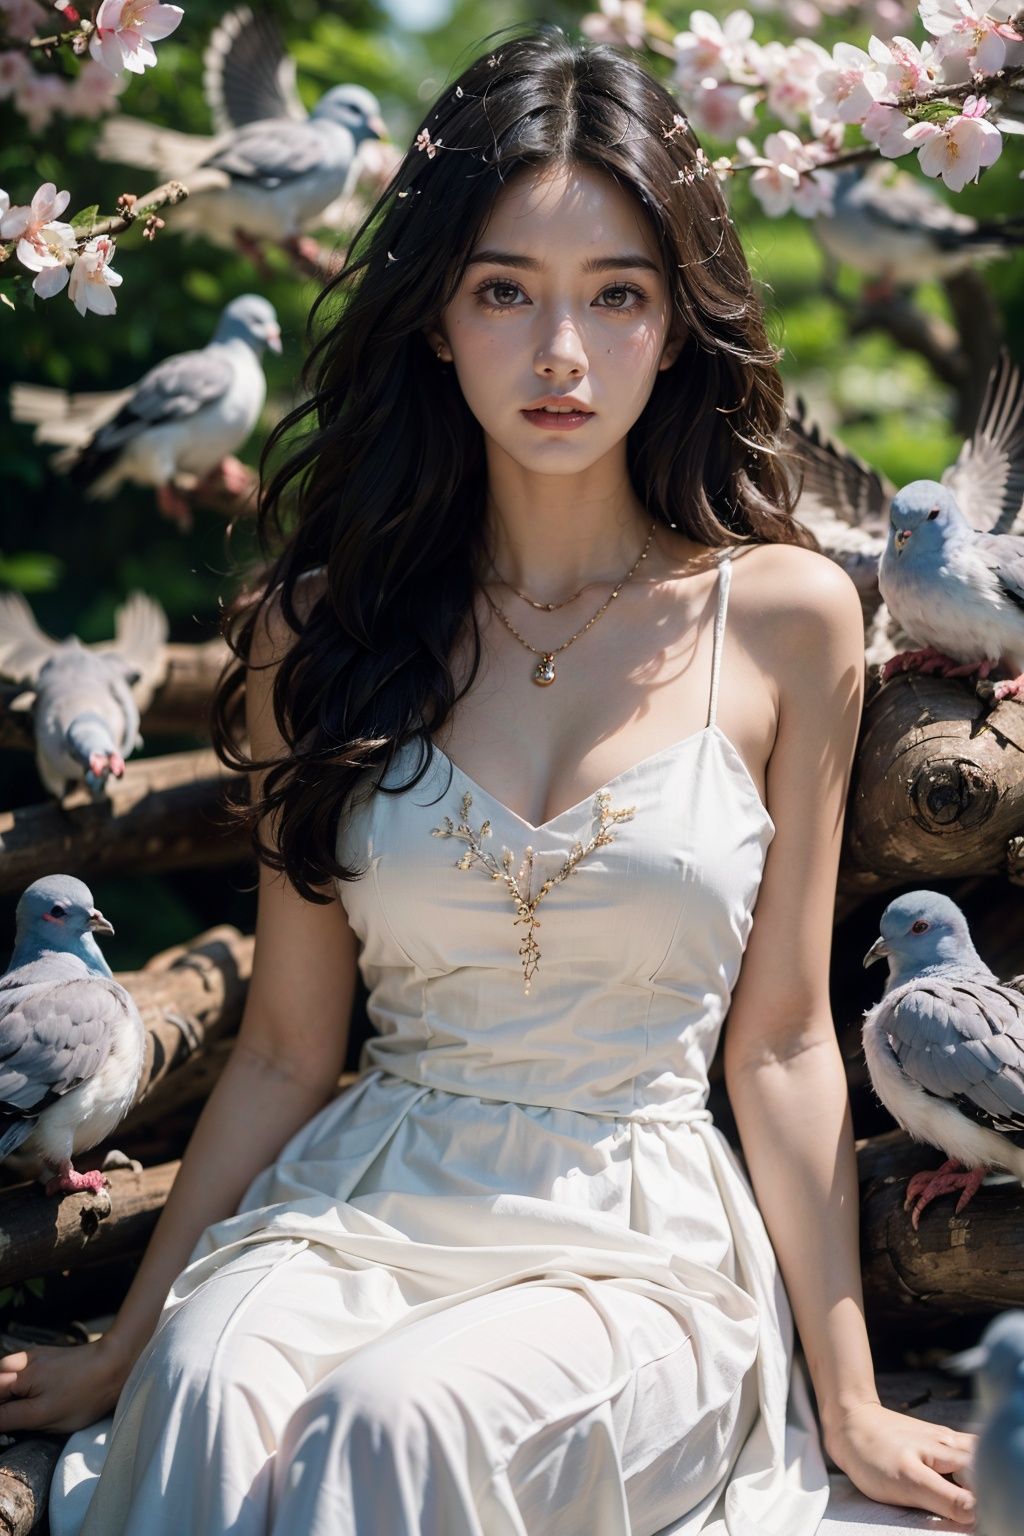 1 girl (surrounded by pigeons), necklace, black hair, dress, sitting, black long hair, flowers, branches, solo, long hair, white dress, brown hair, bare shoulders, birds, foreground blocking, depth of field, watching the audience, dynamic posture, realistic, cherry blossom, feathers